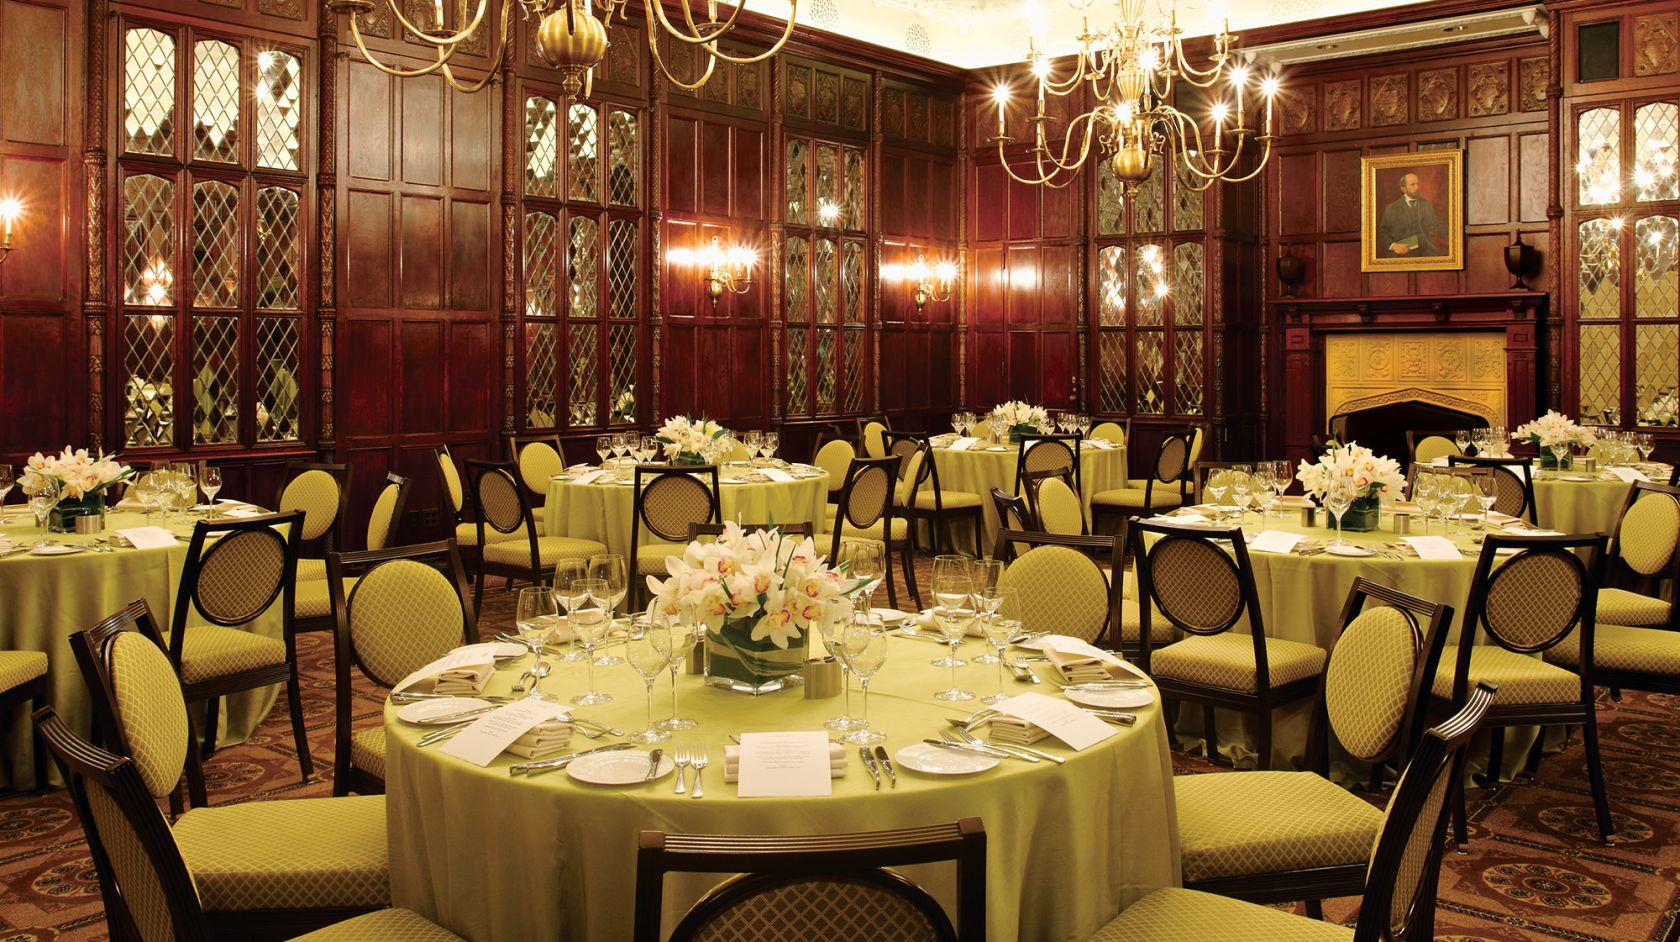 The Hay-Adams Room set up for a private event with circular tables